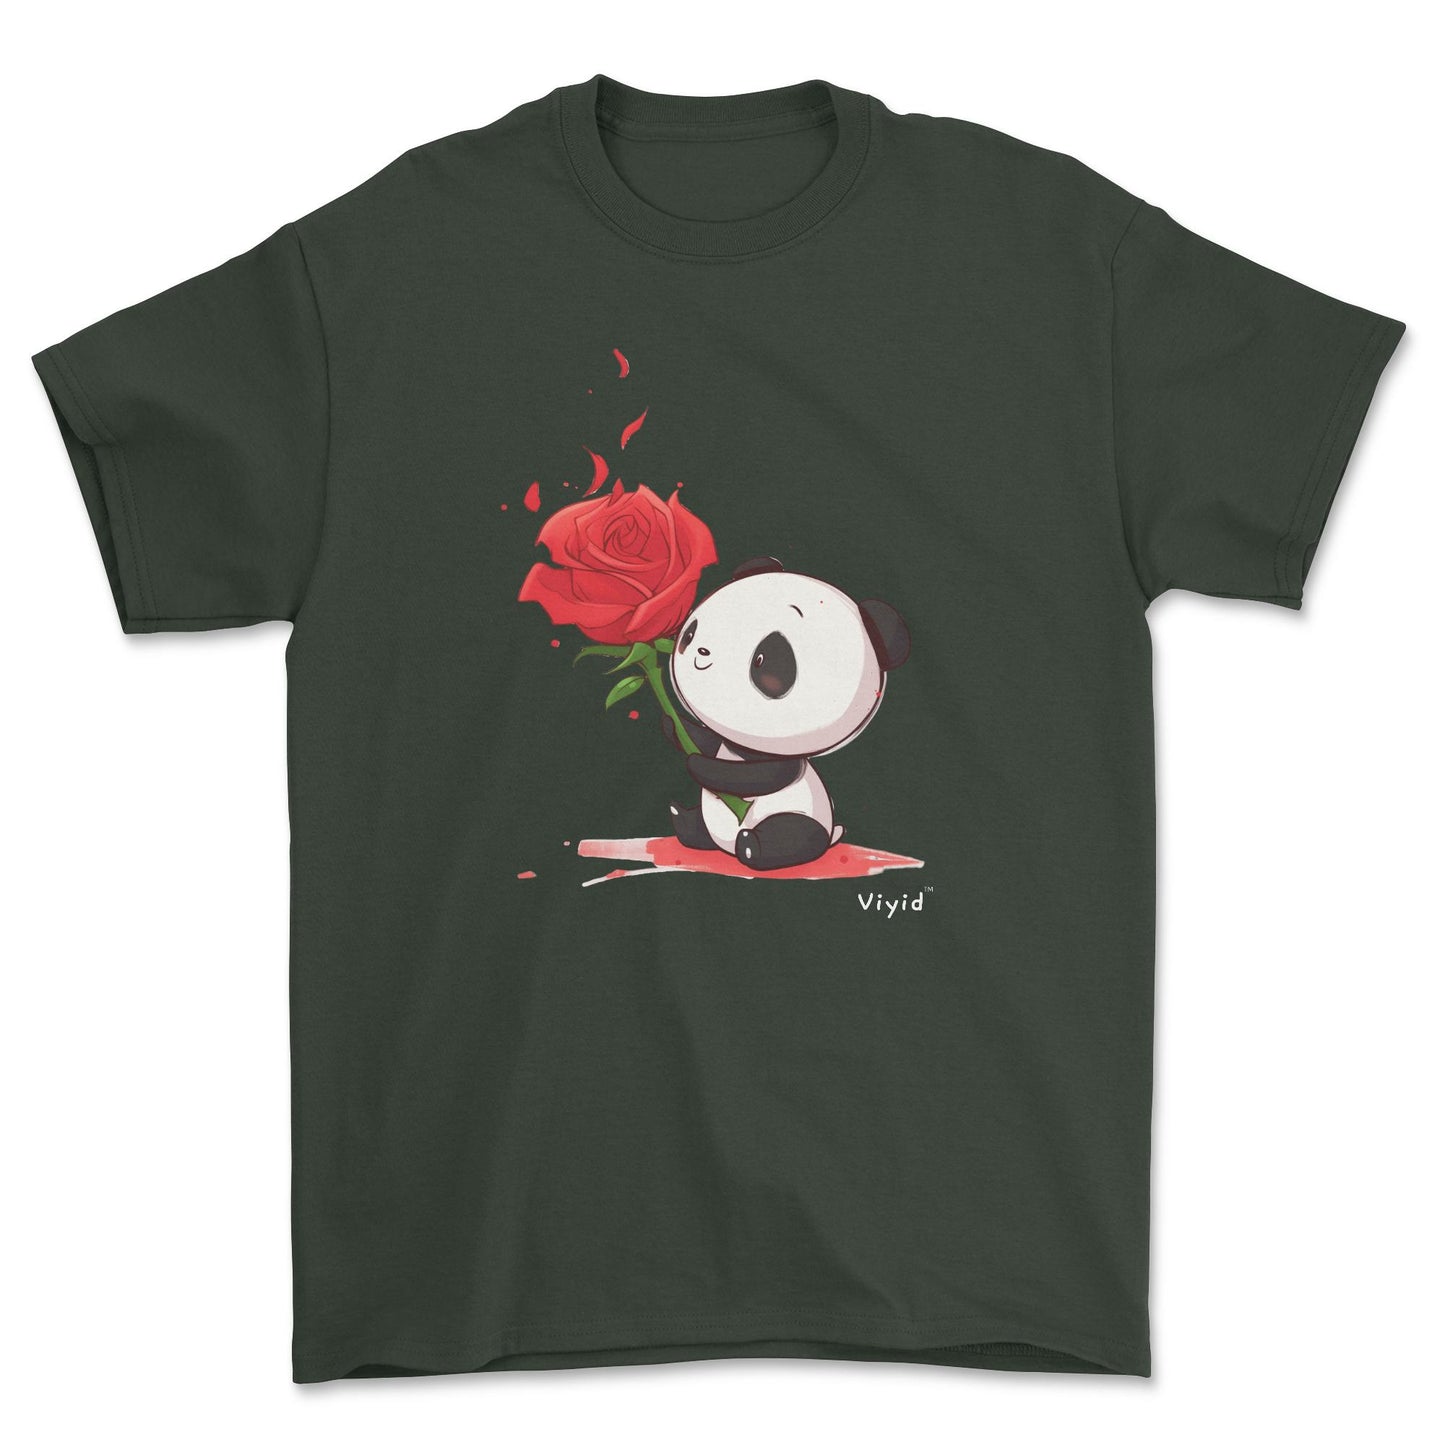 rose holding panda youth t-shirt forest green